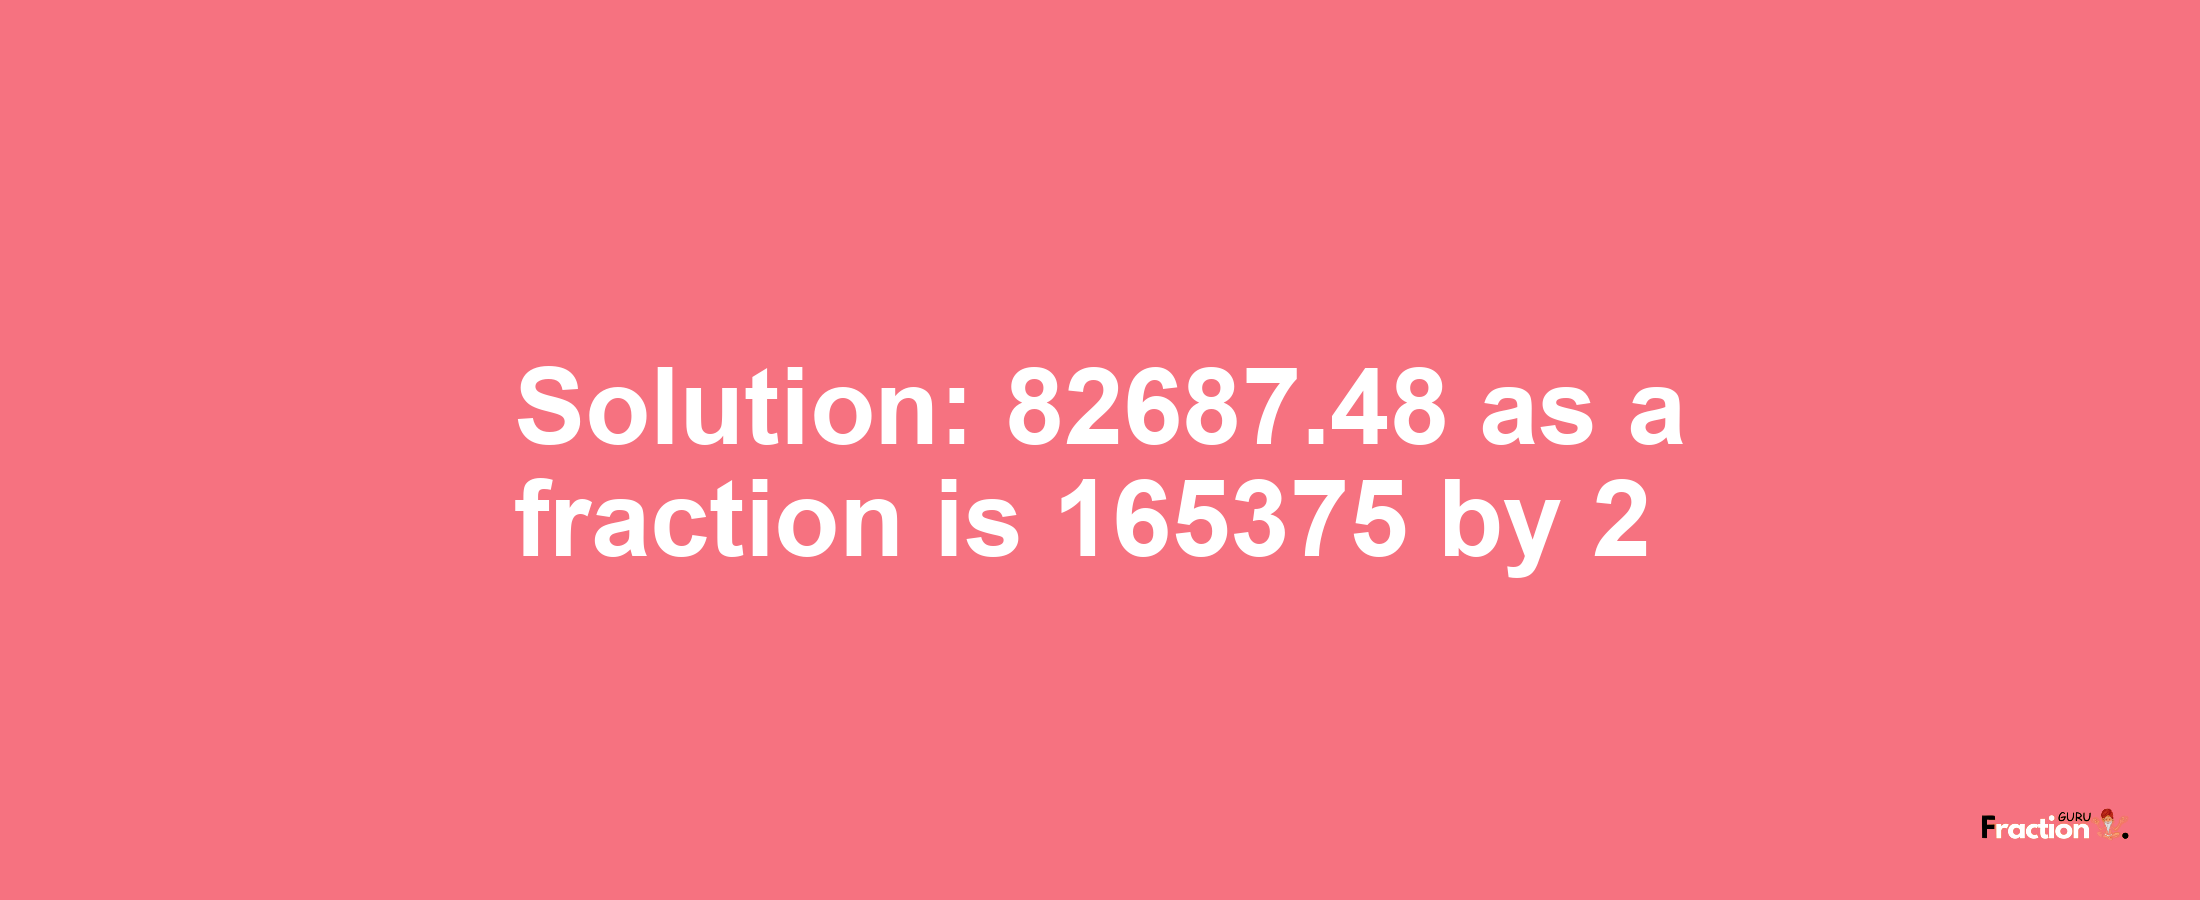 Solution:82687.48 as a fraction is 165375/2